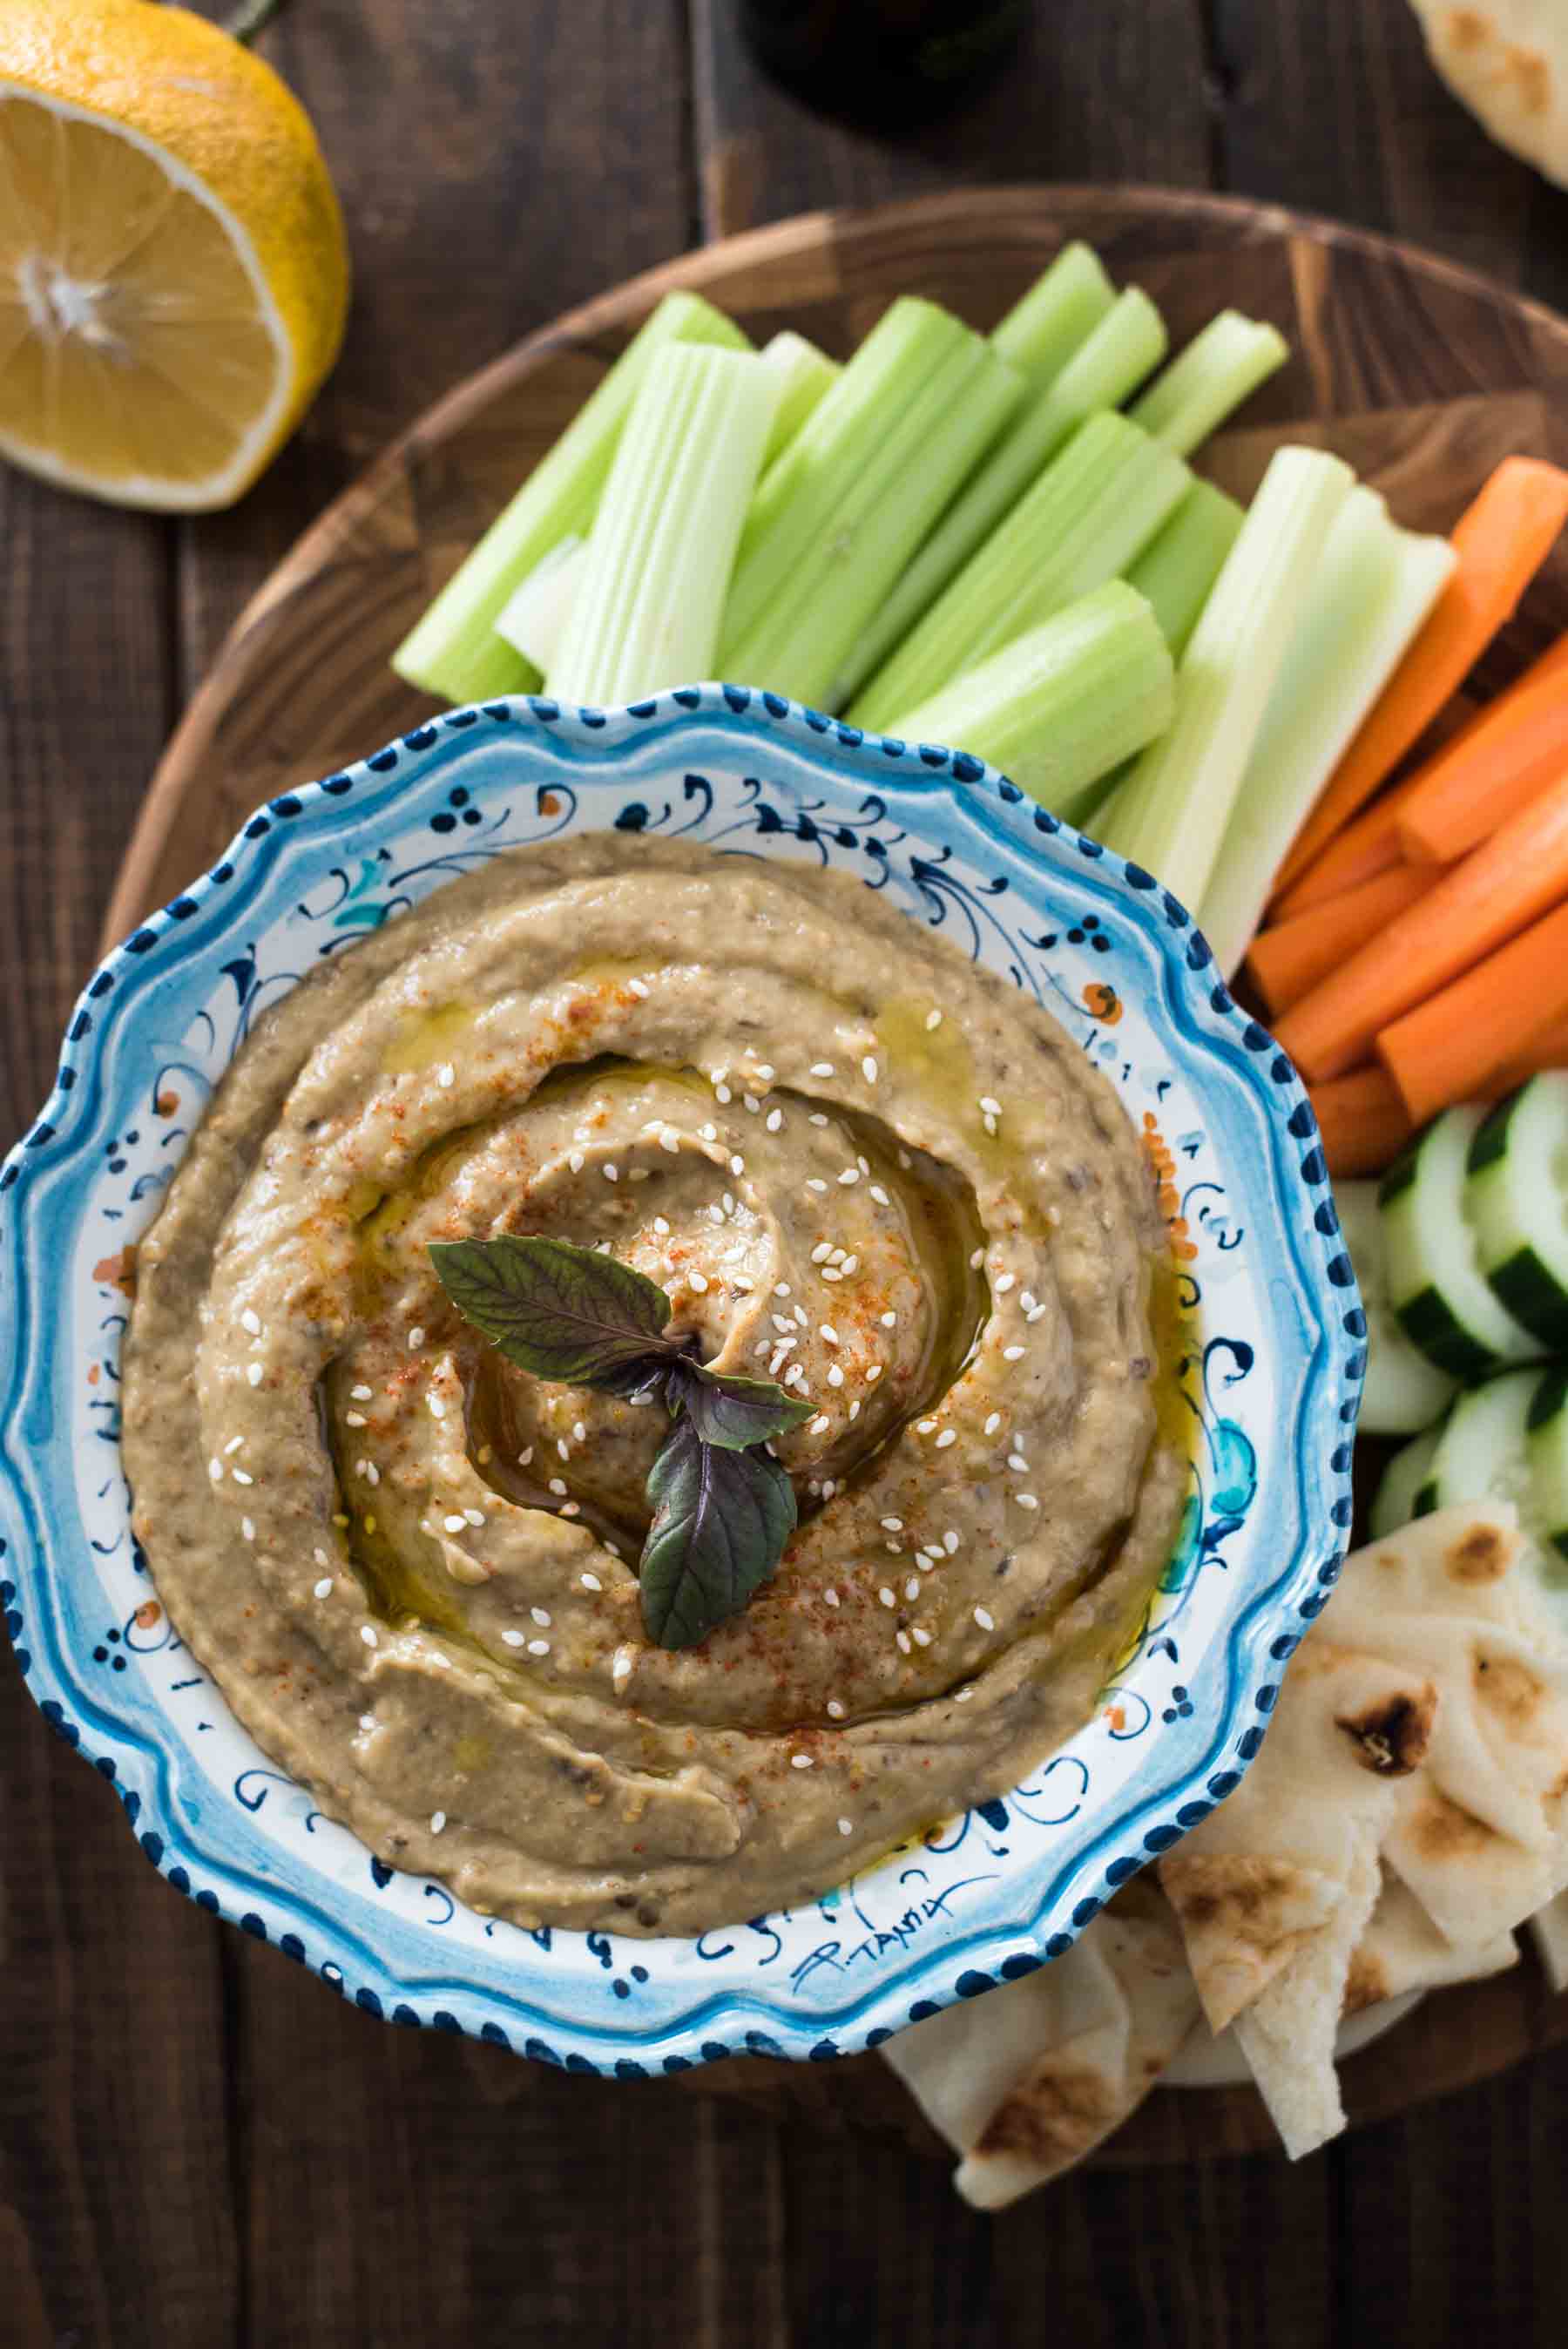 A simple appetizer that will thrill vegans as well as meat-eaters! Smokey, slightly chunky, and loaded with flavor, this traditional eggplant Baba Ganoush recipe is kicked up with a touch of cumin and paprika, plenty of garlic, and fresh Meyer lemon juice. 